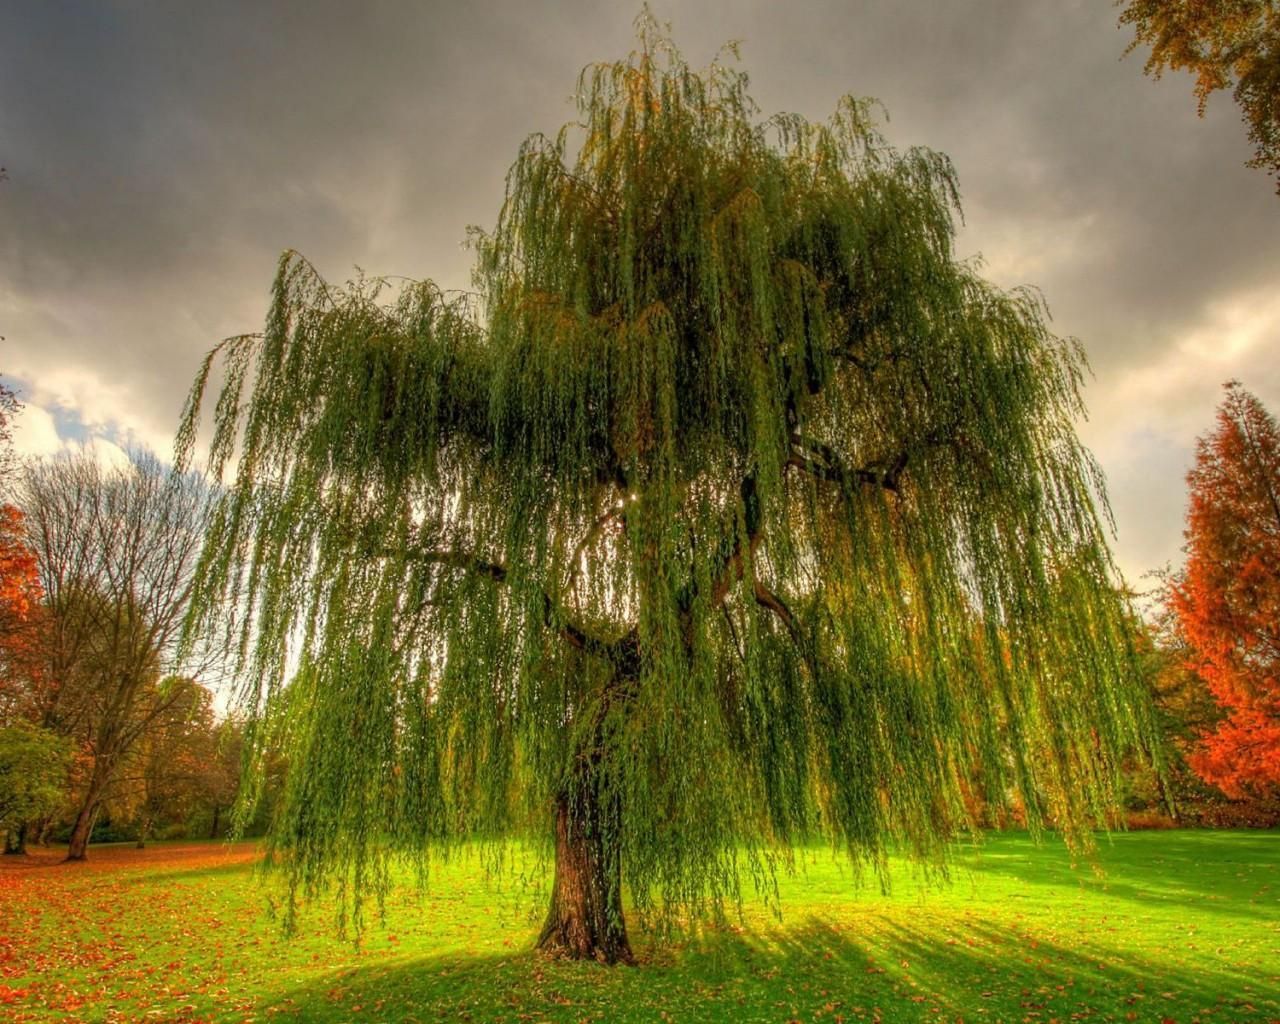 image For Weeping Willow Tree In Winter. HD Wallpaper Range. Willow tree tattoos, Weeping willow, Pretty trees